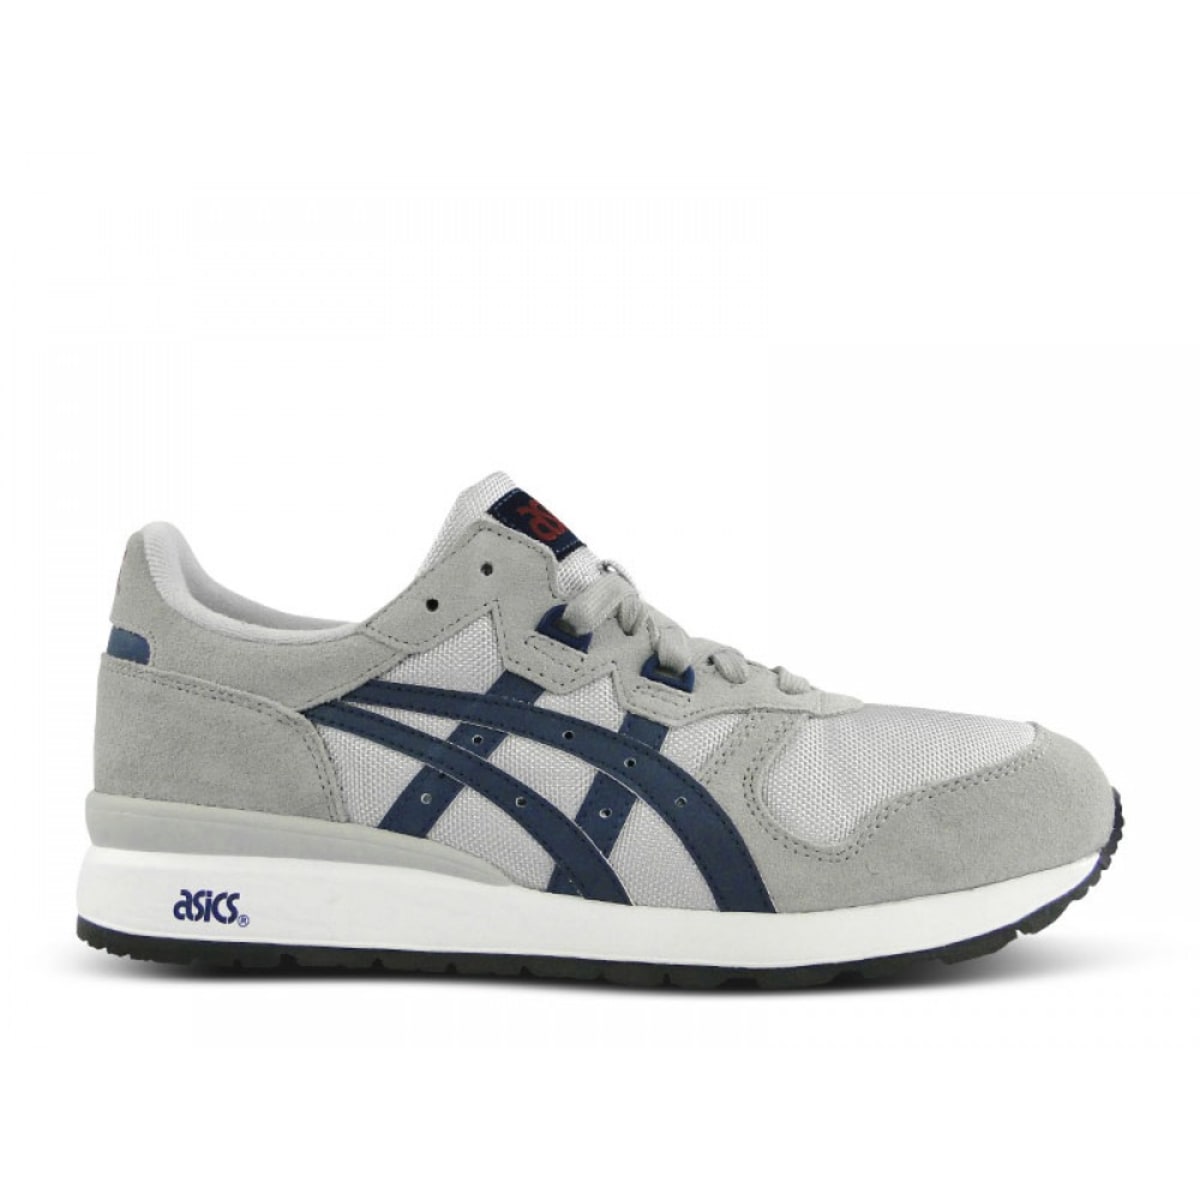 Asics Gel | ASICS | Sneaker News, Launches, Release Dates, Collabs & Info